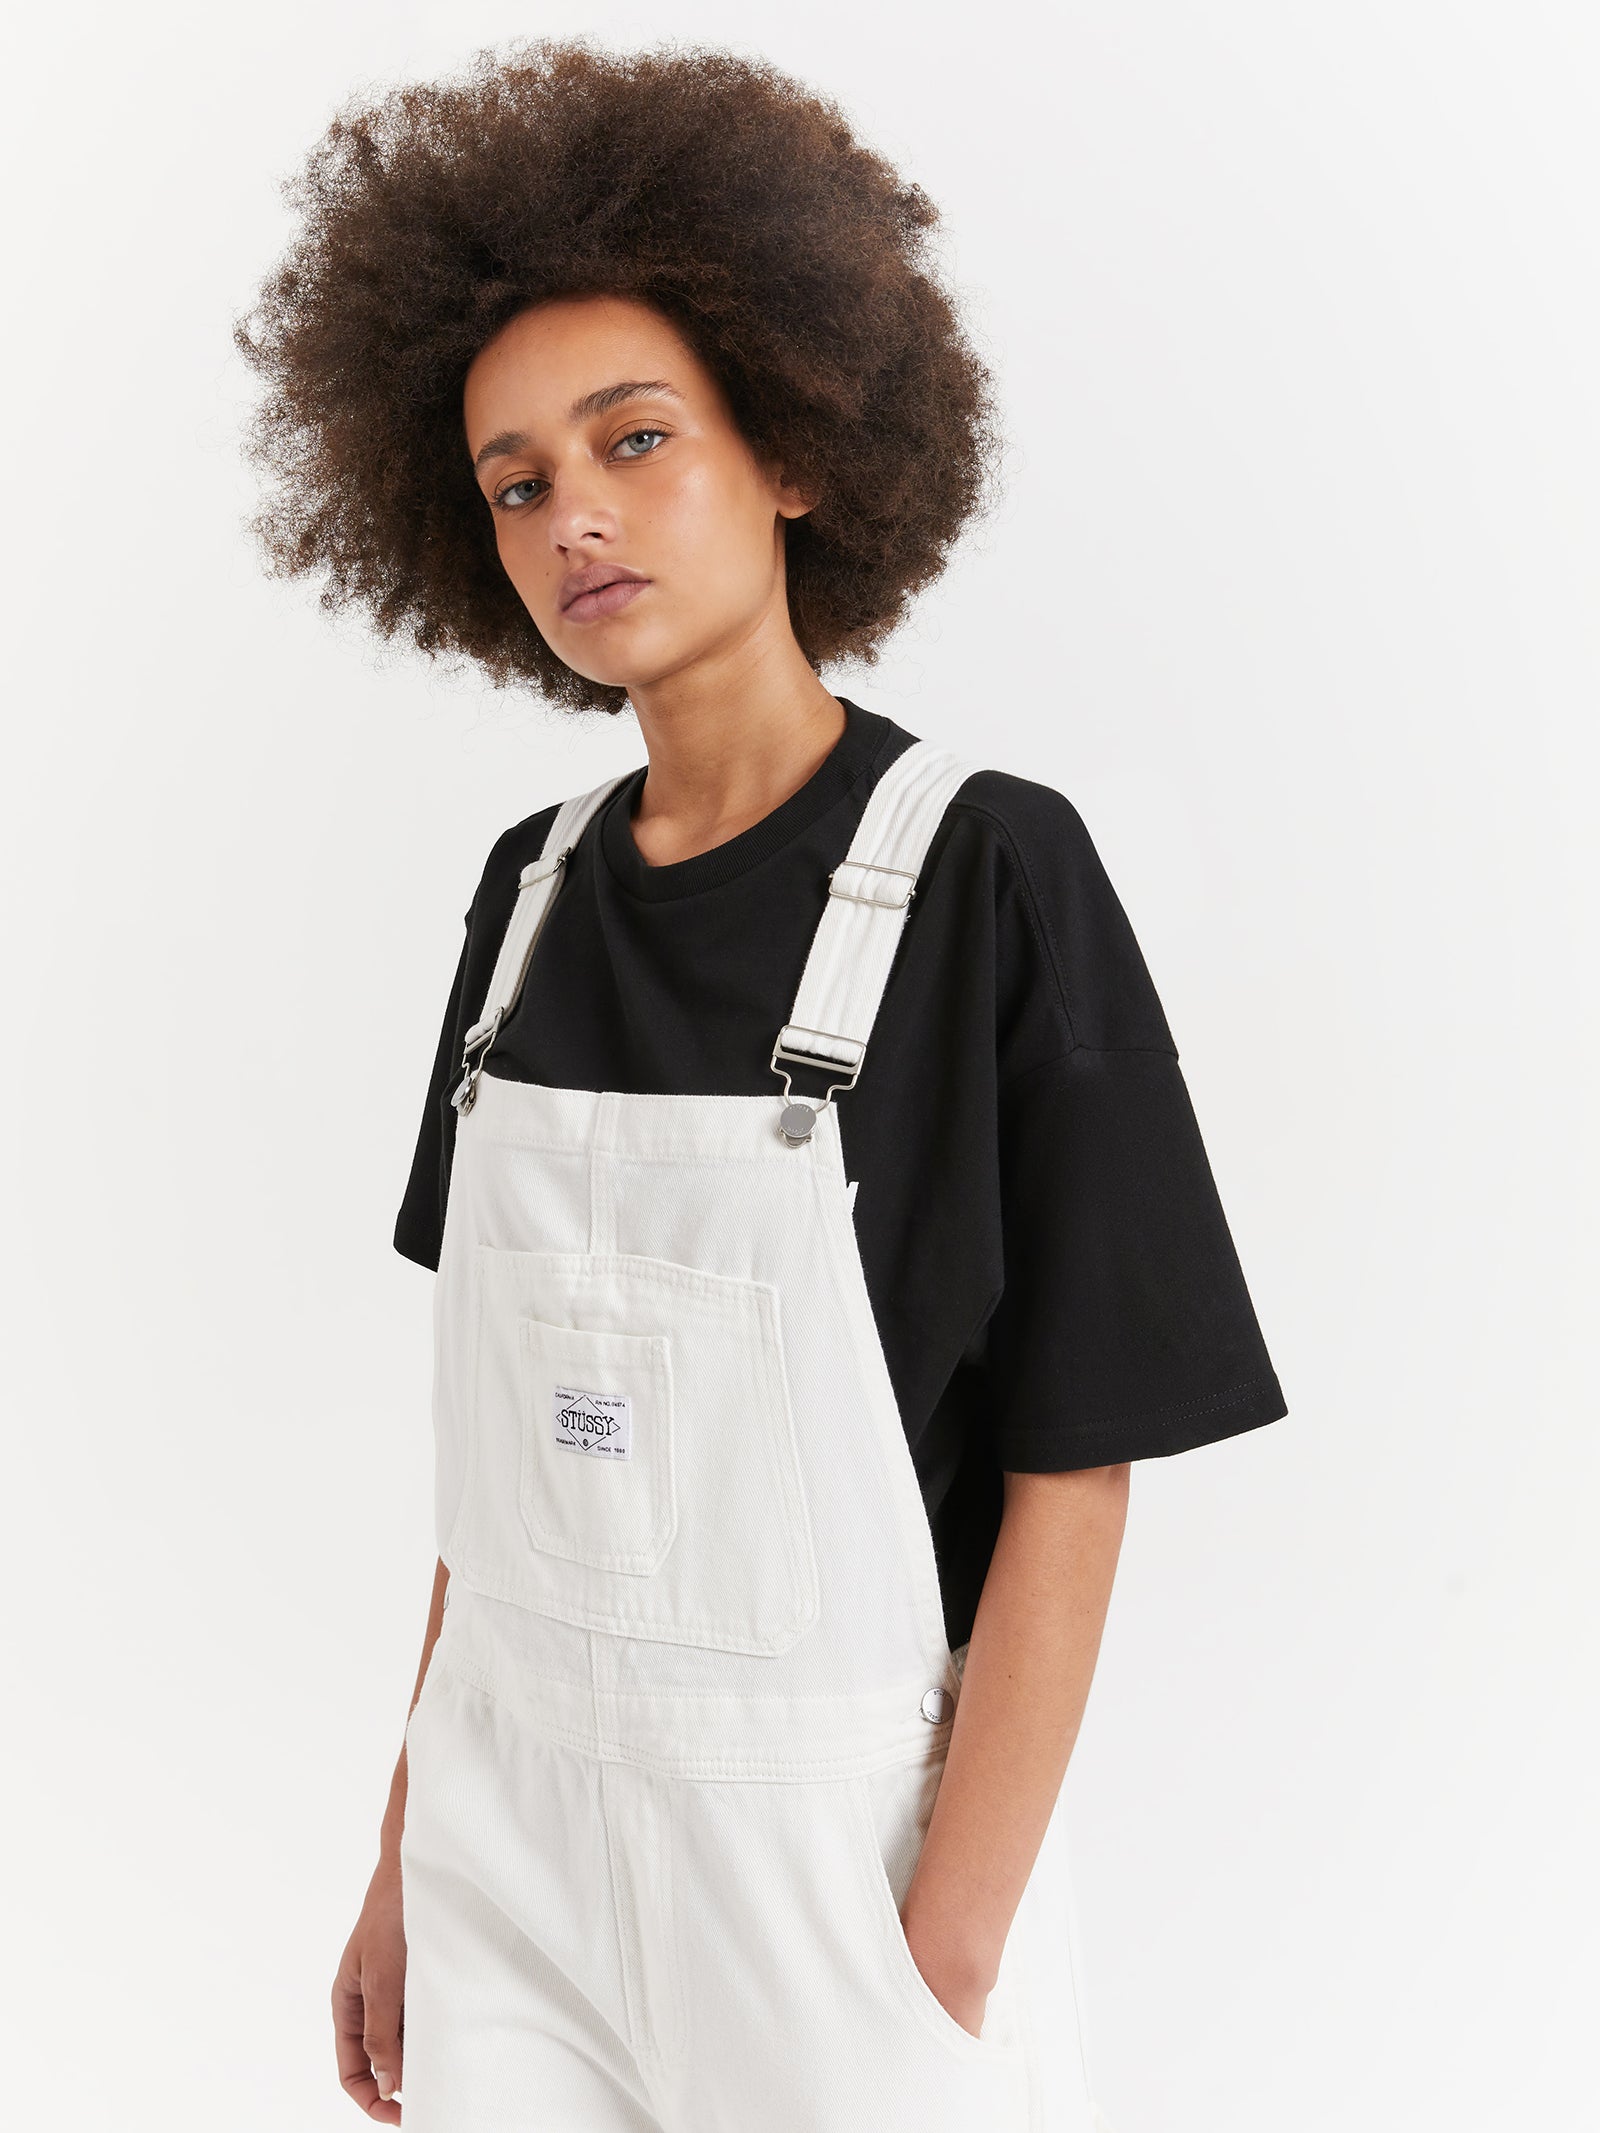 Shop White Stuff Women's Dungarees up to 60% Off